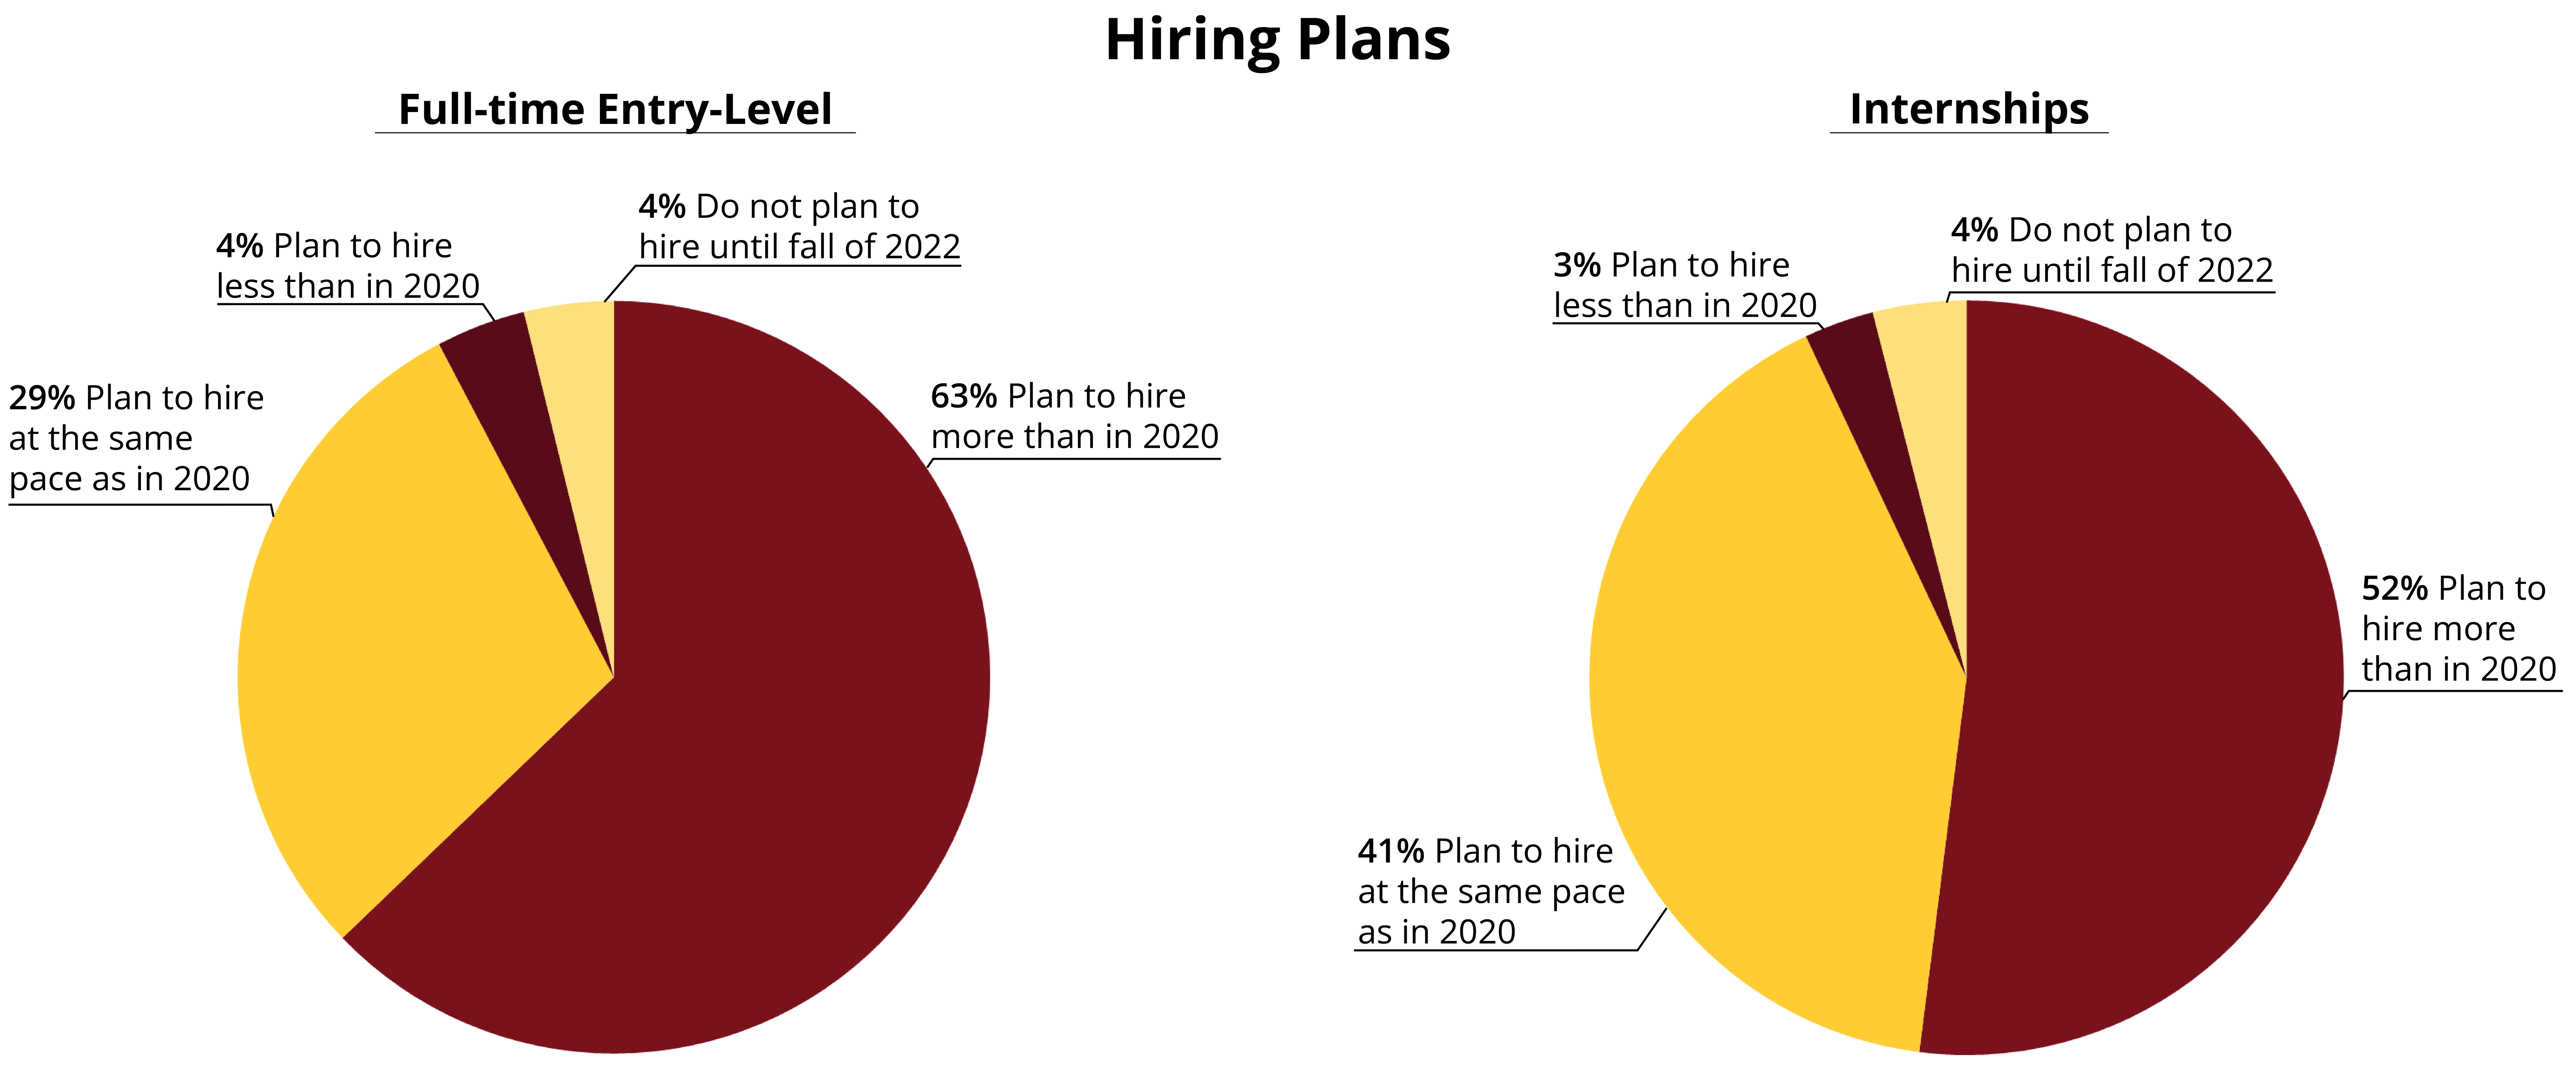 Pie chart. 63% of employer respondents plan to hire more than in 2020, 29% plan to hire at the same pace, 4% plan to hire less, and 4% do not plan to hire until fall of 2022.